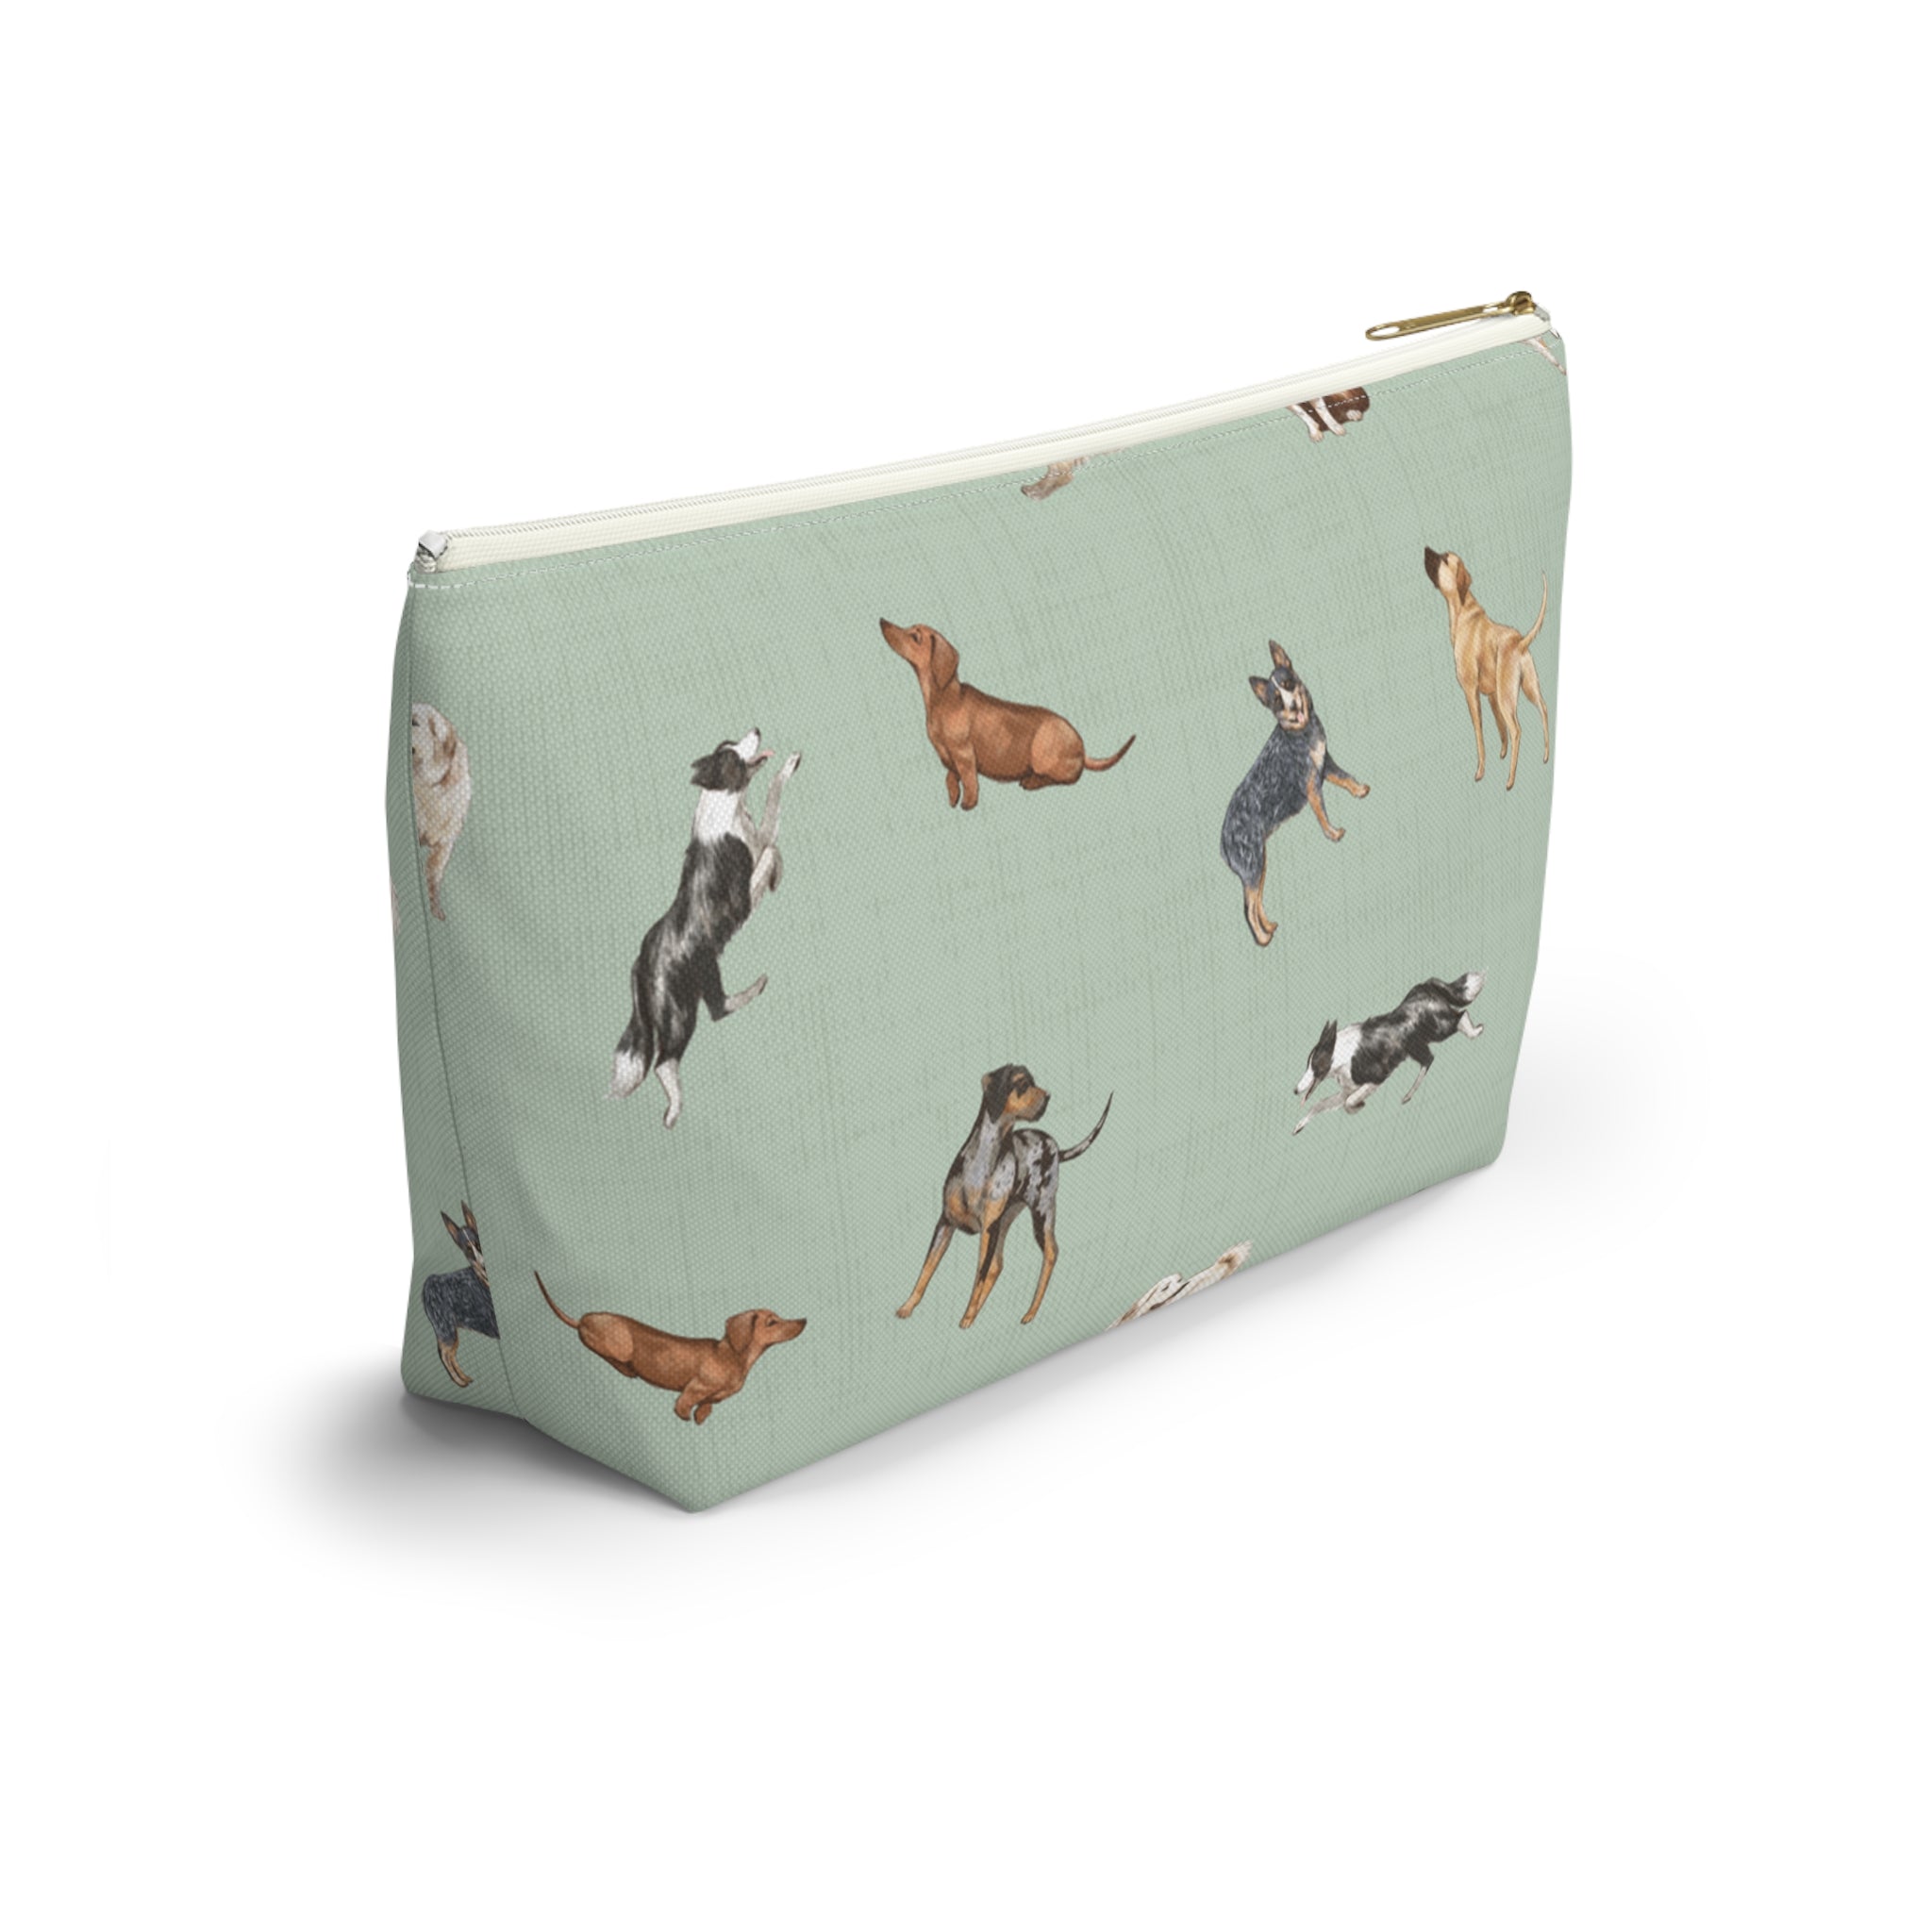 Cow Dogs Pencil Pouch in Mint